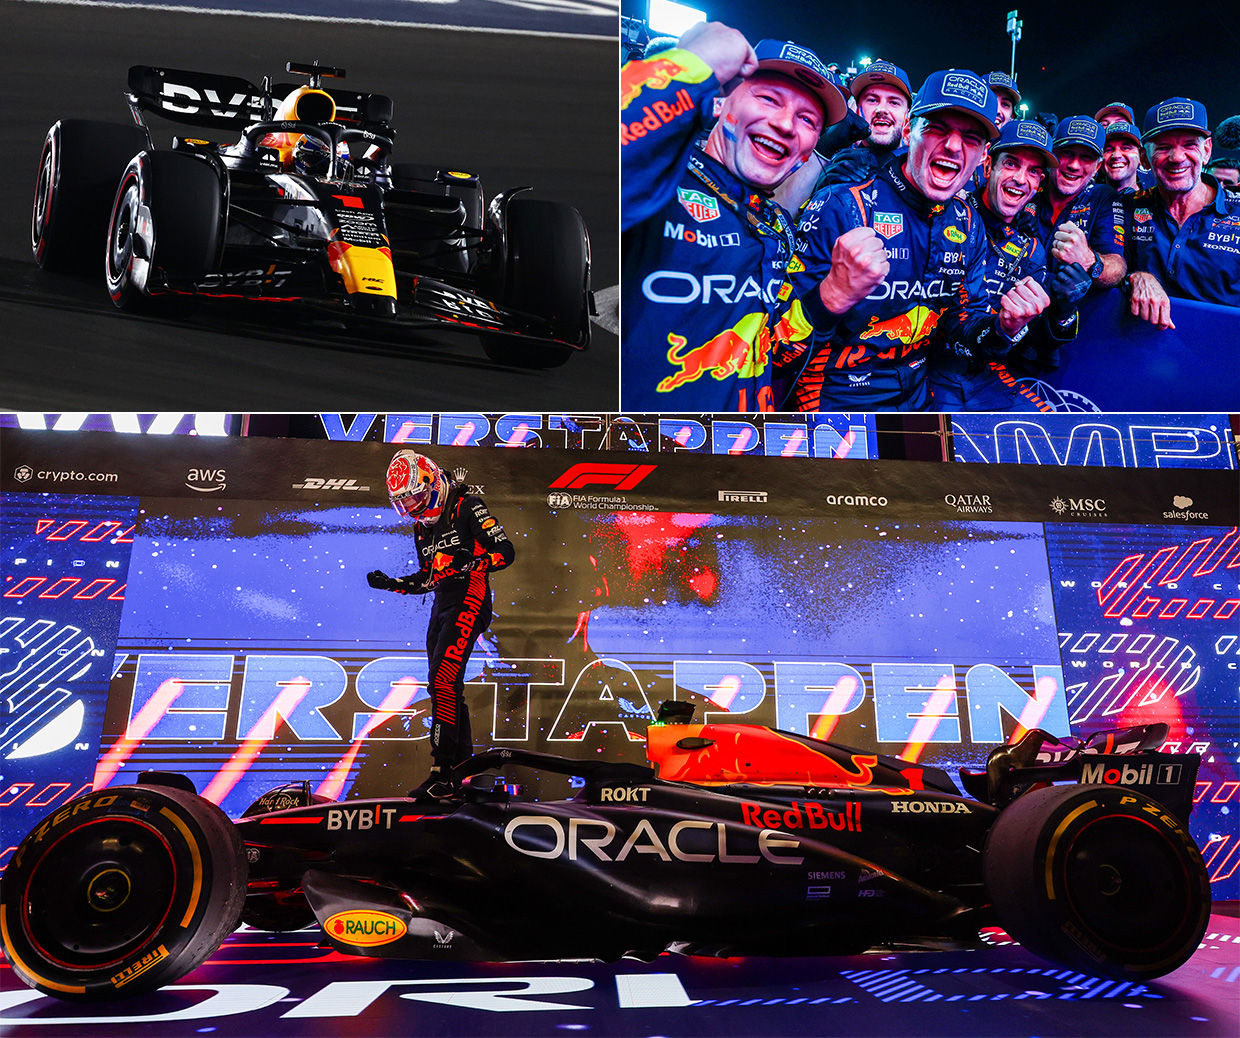 Oracle Red Bull Racing Driver Max Verstappen Wins Third Consecutive F1